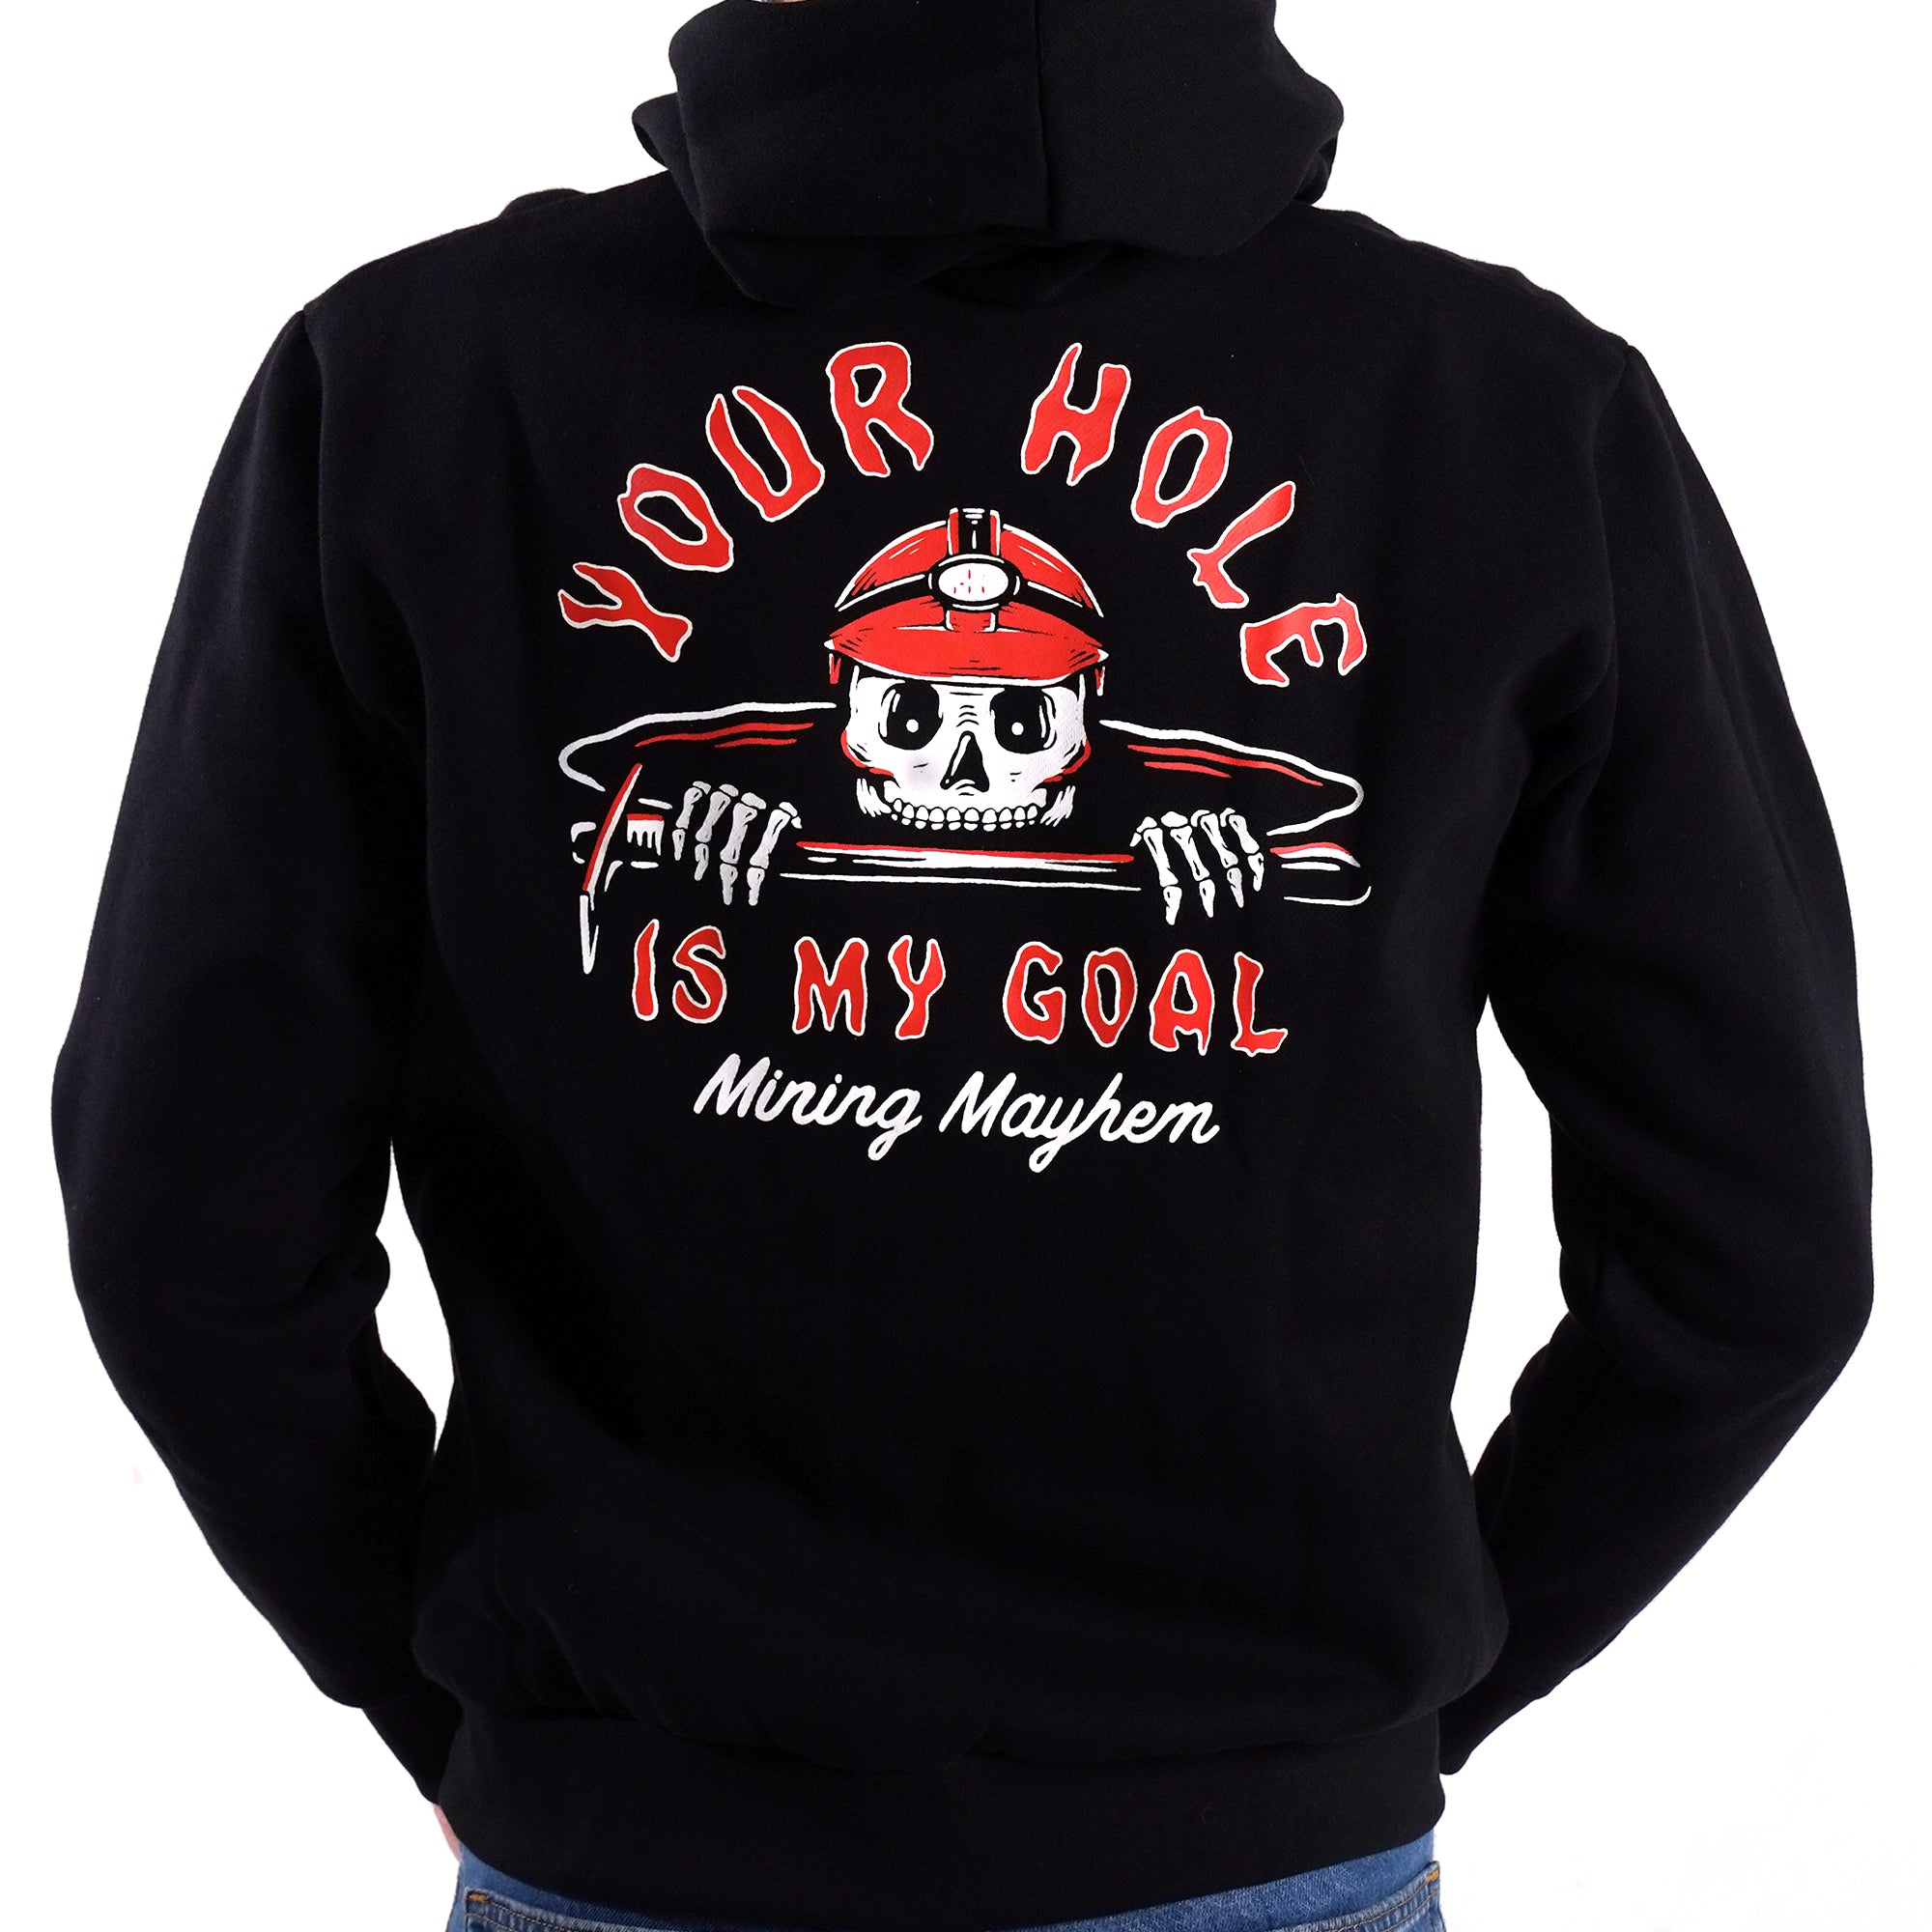 Your Hole Is My Goal - Hoodie (Black)